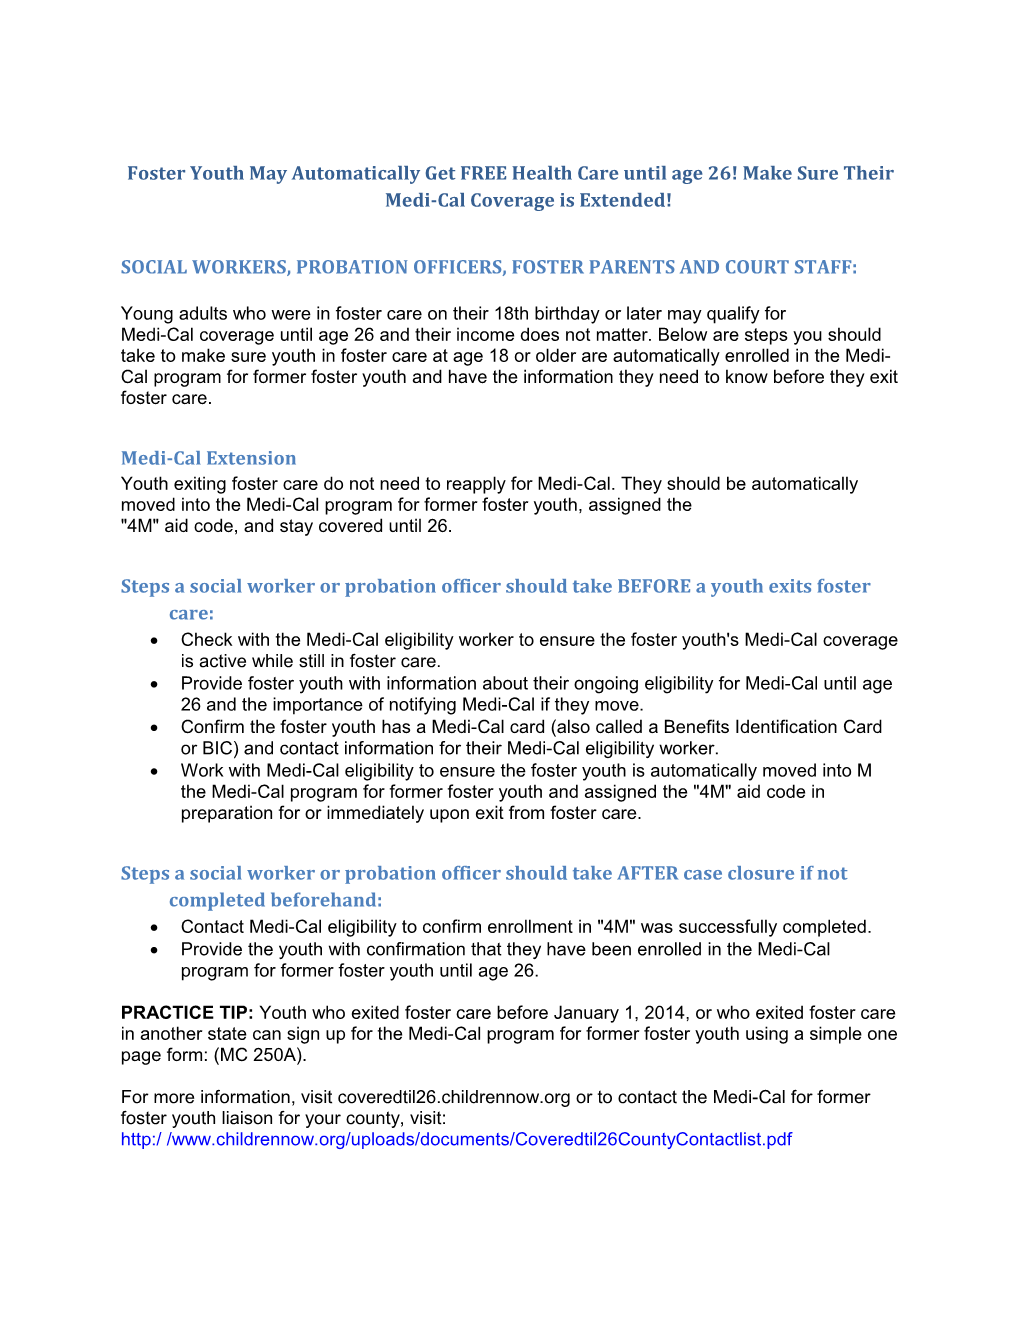 Former Foster Youth Flyer - Eligibility Workers (Text Only)